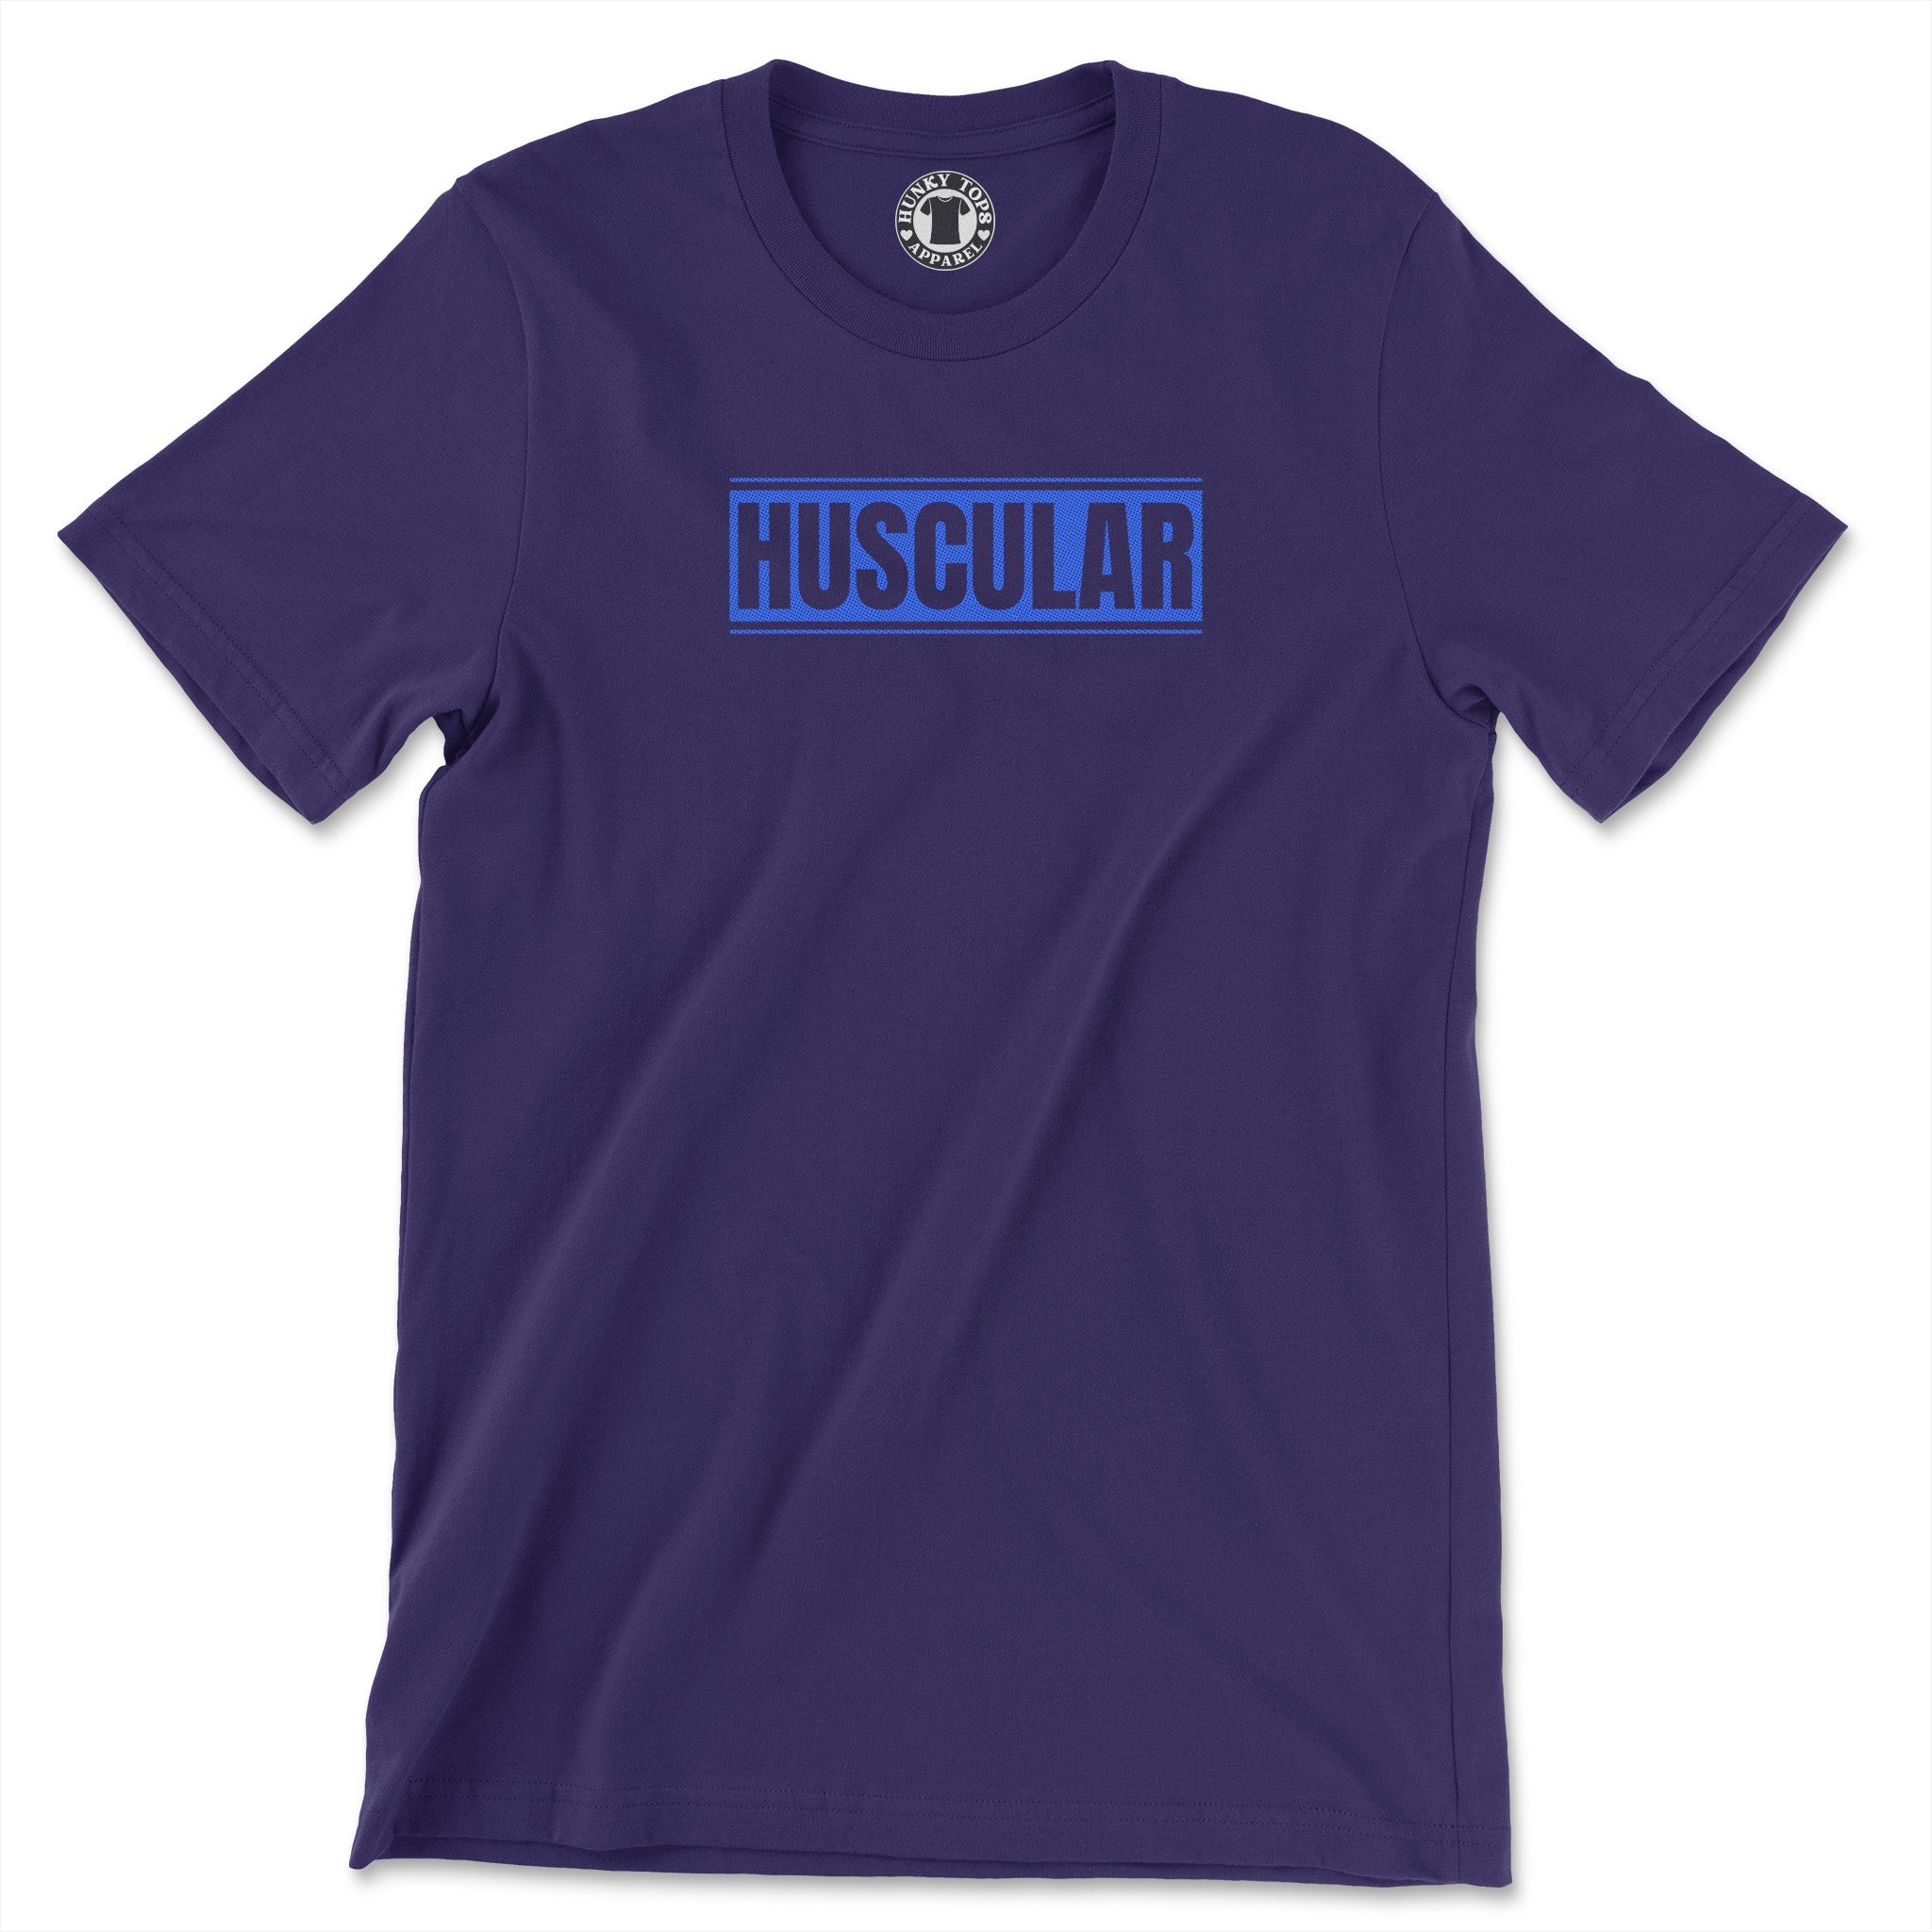 "HUSCULAR" Bold Statement T-shirt - Hunky Tops#color_team purple